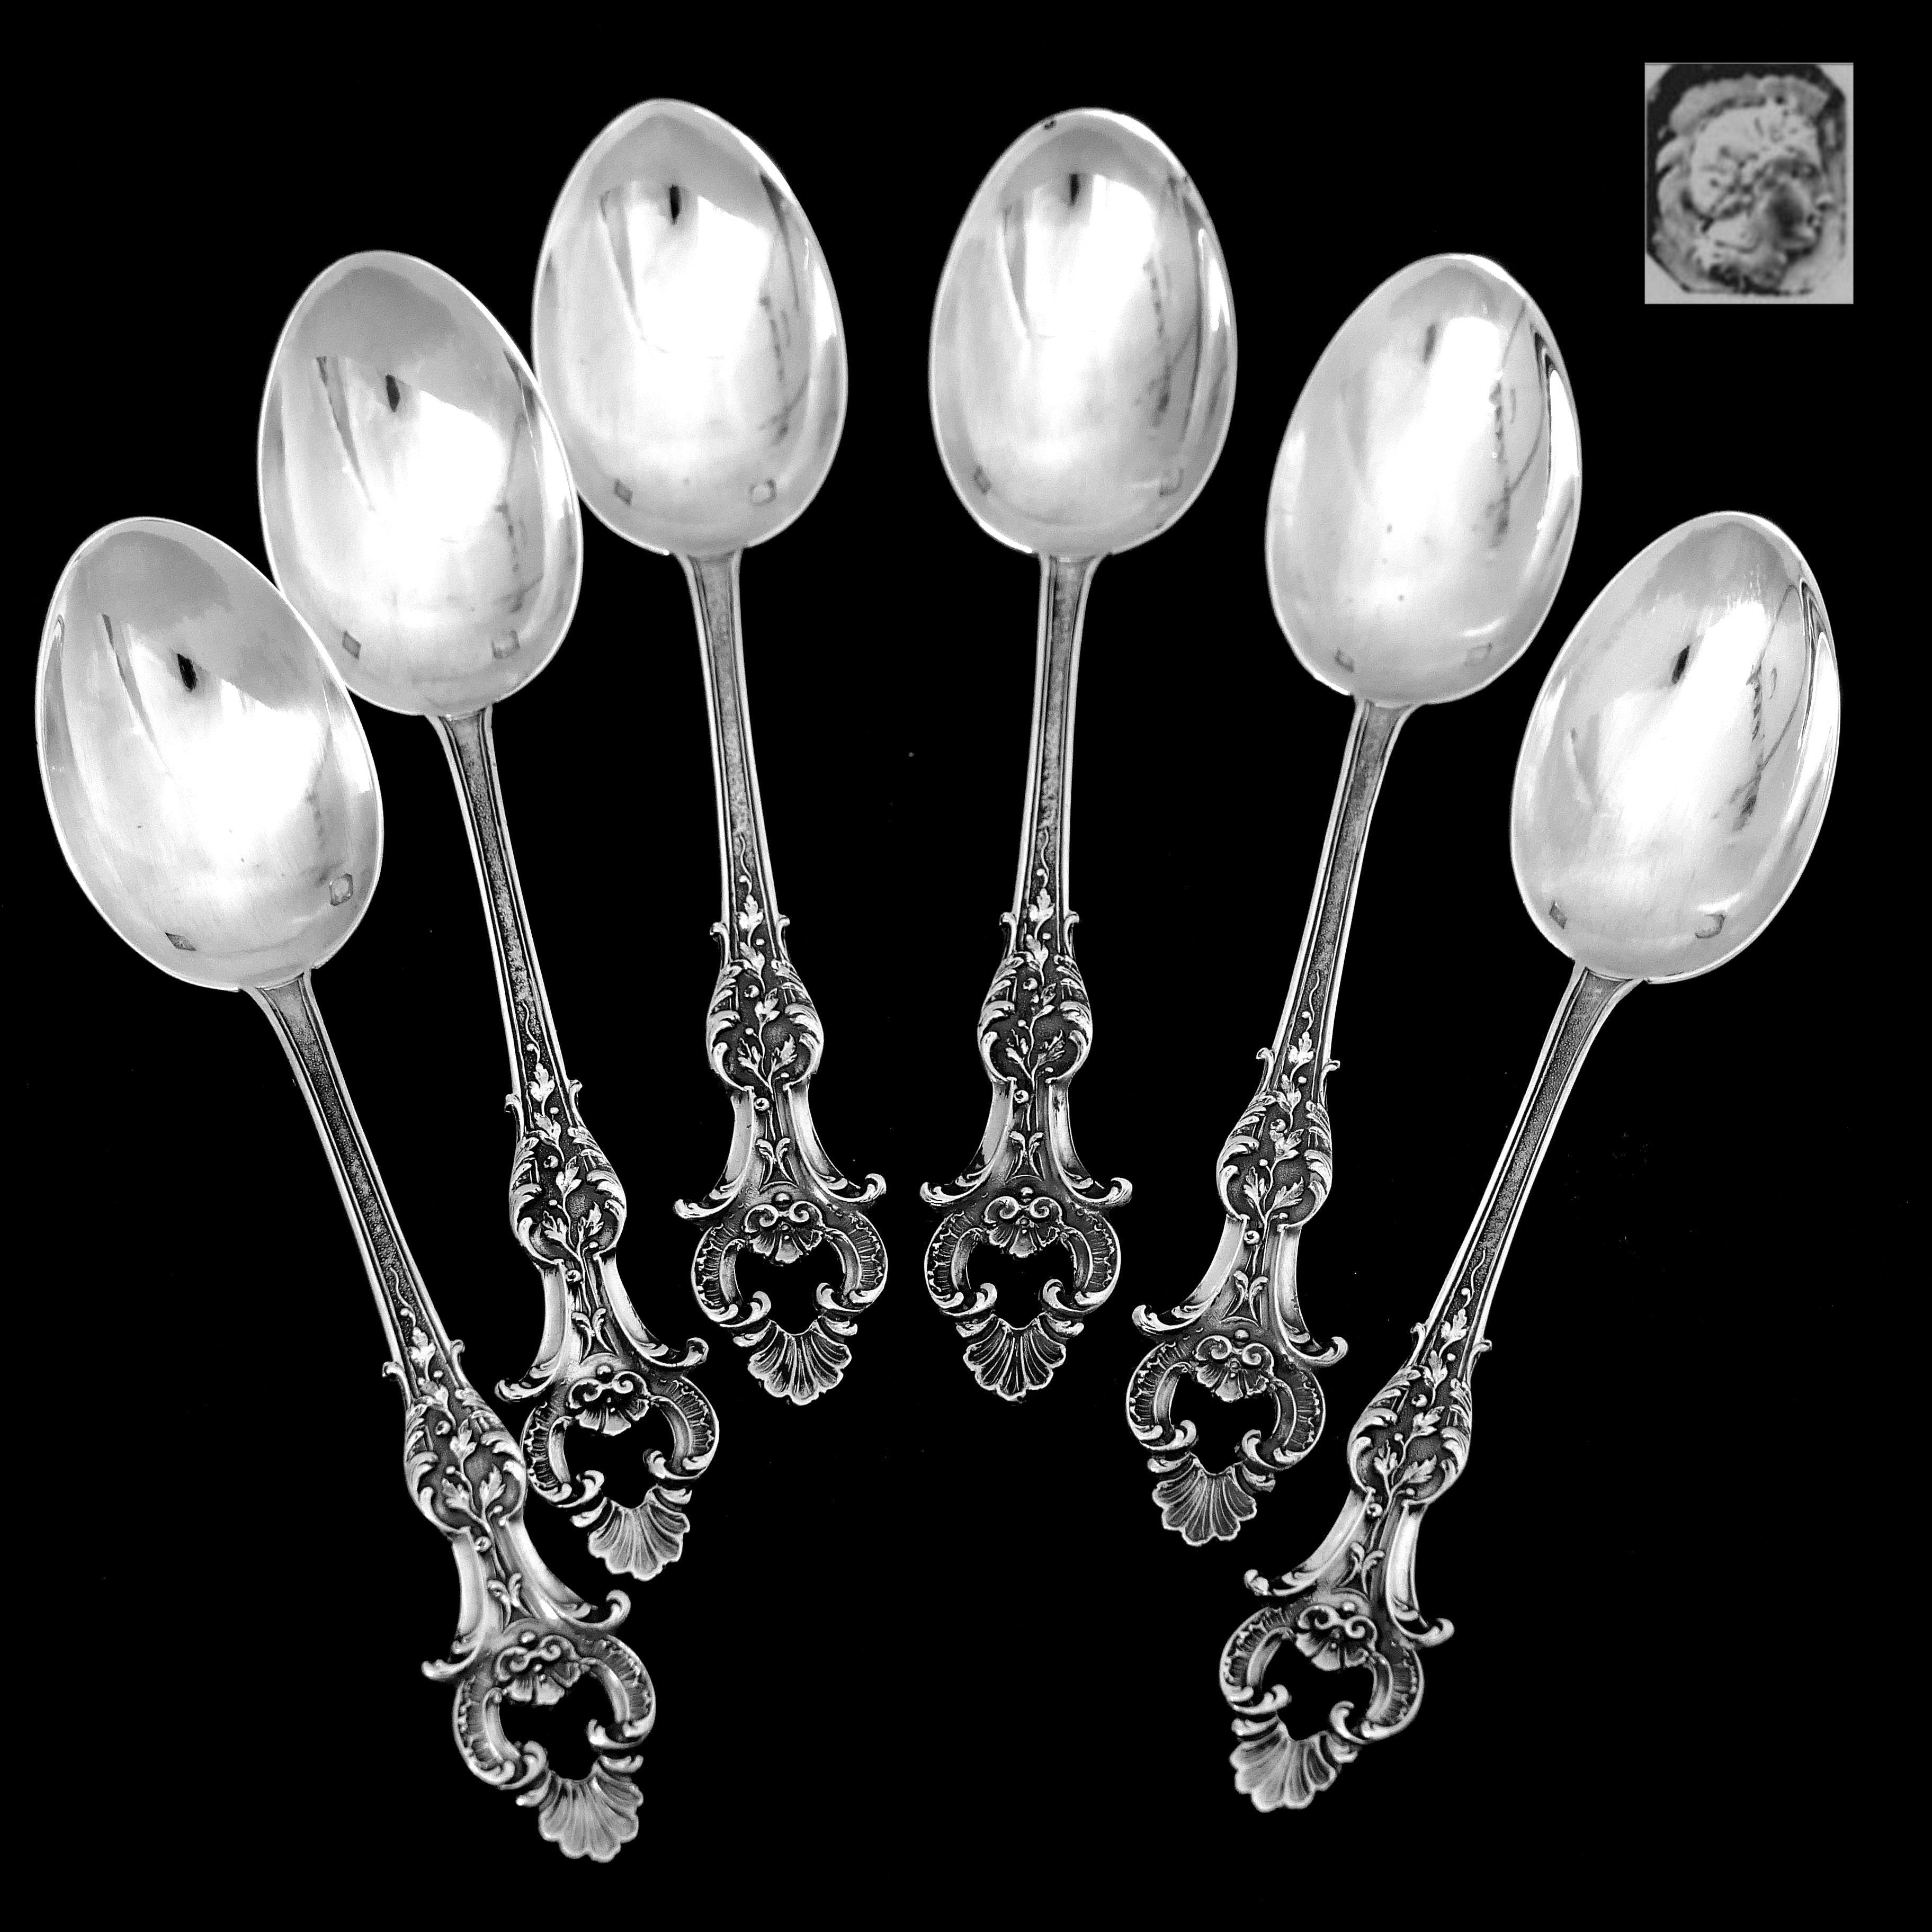 Head of Minerve 1st titre for 950/1000 French sterling silver guarantee.

An exceptional set from the point of view of its design as well as the quality of the engraving. The spatulas are pierced and decorated with foliage and shell. No